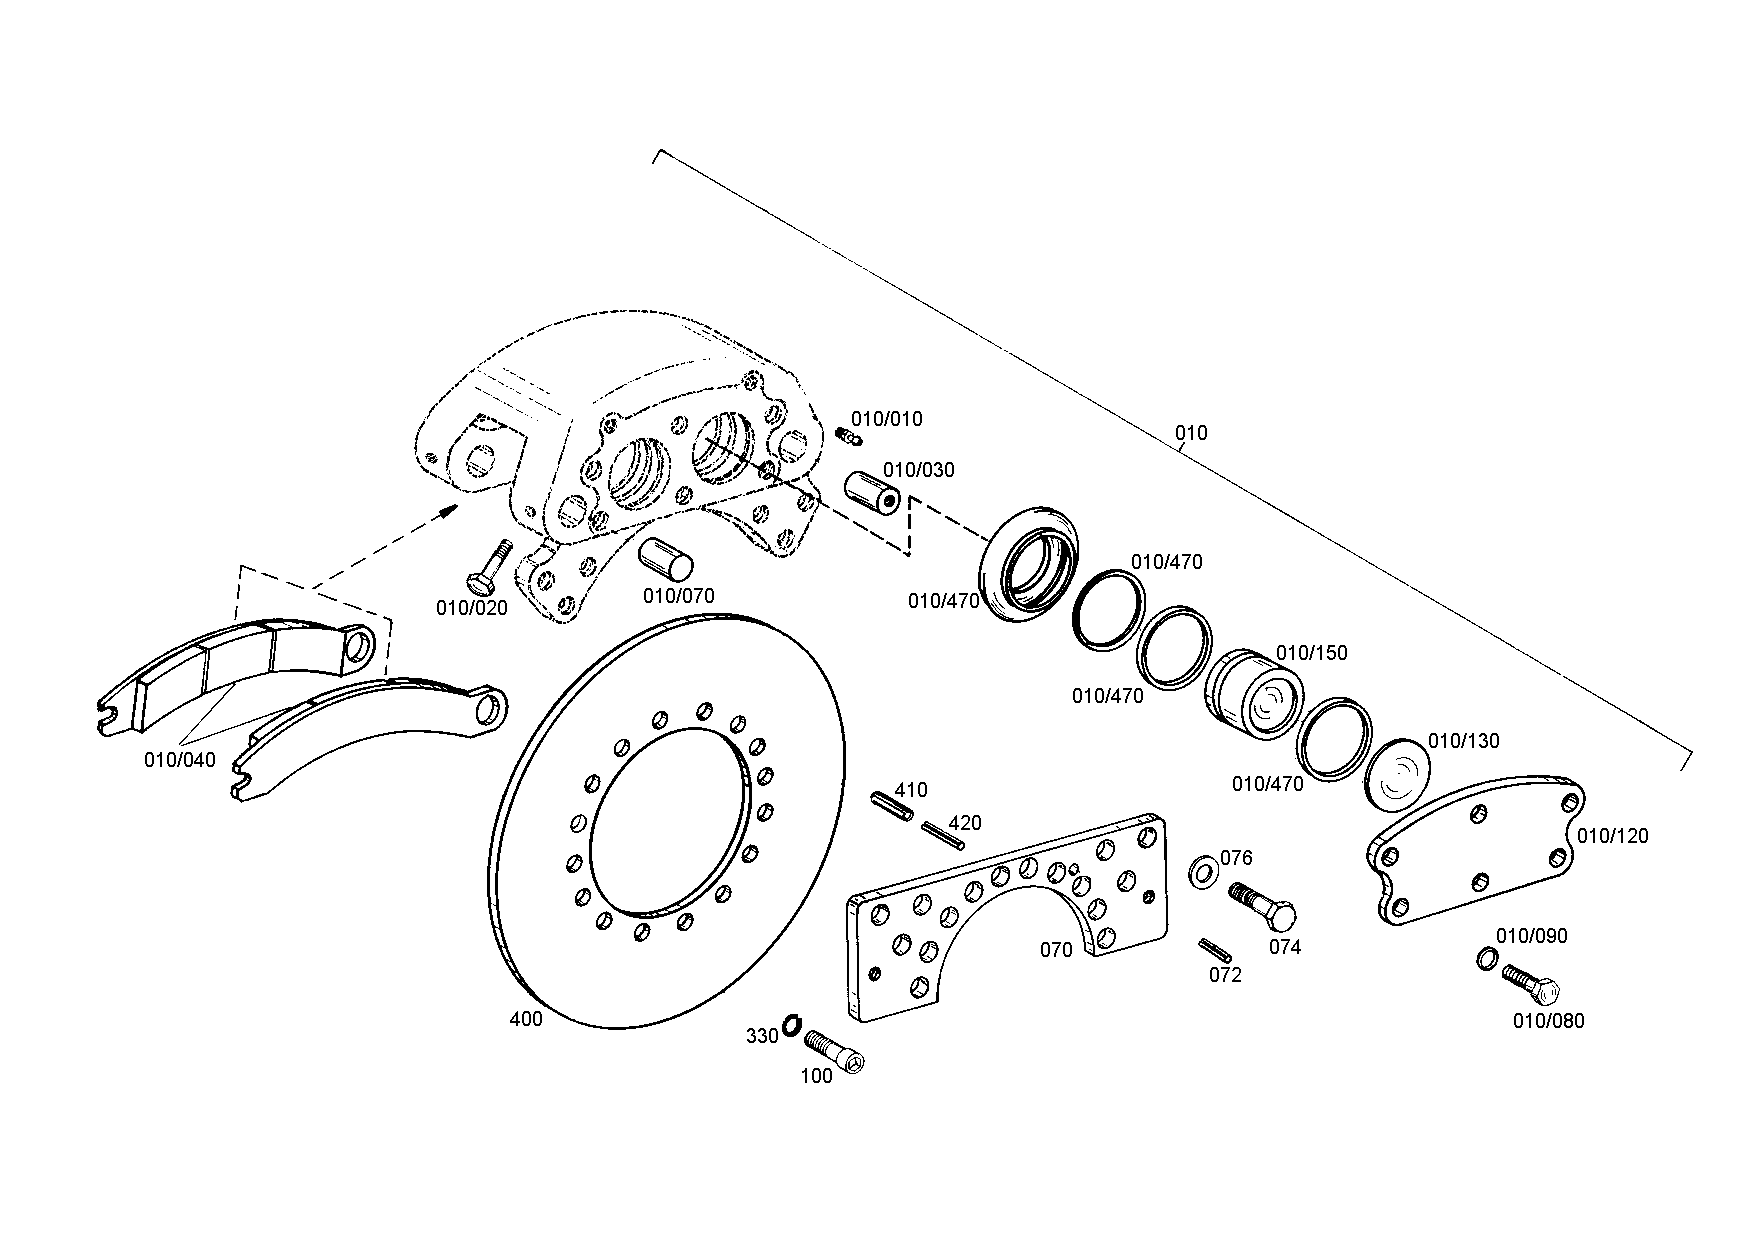 drawing for CNH NEW HOLLAND 8900128696 - SCREW (figure 5)